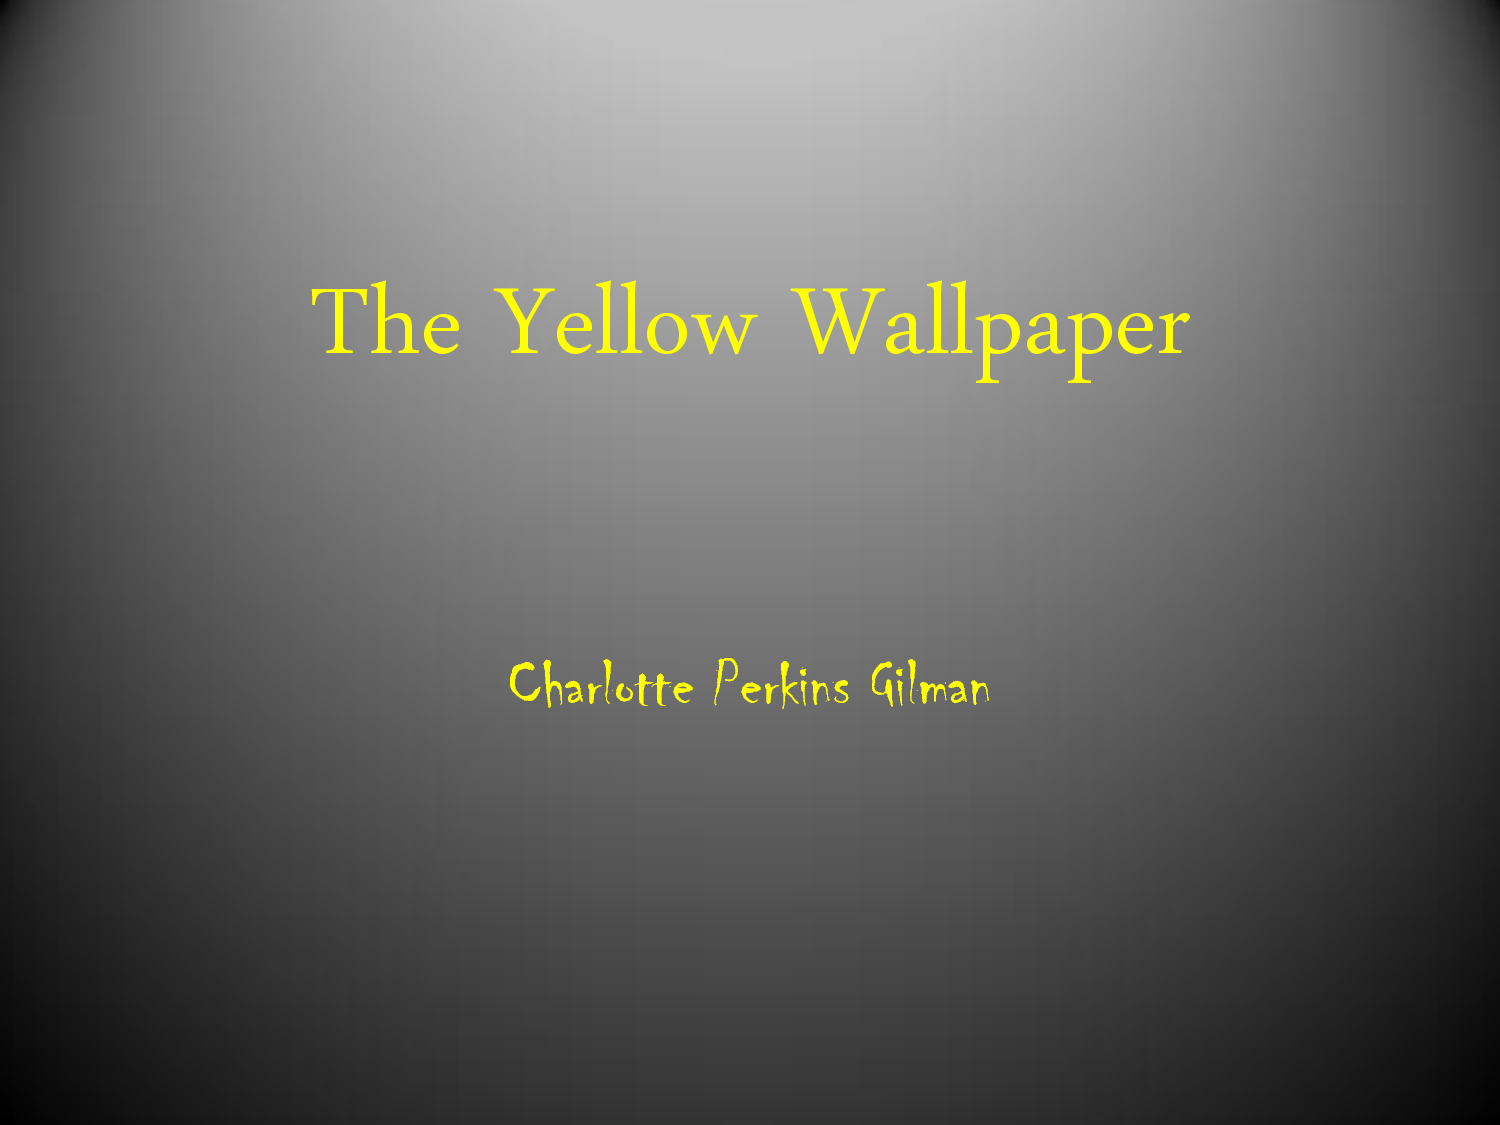 Wallpaper Why I Wrote The Yellow